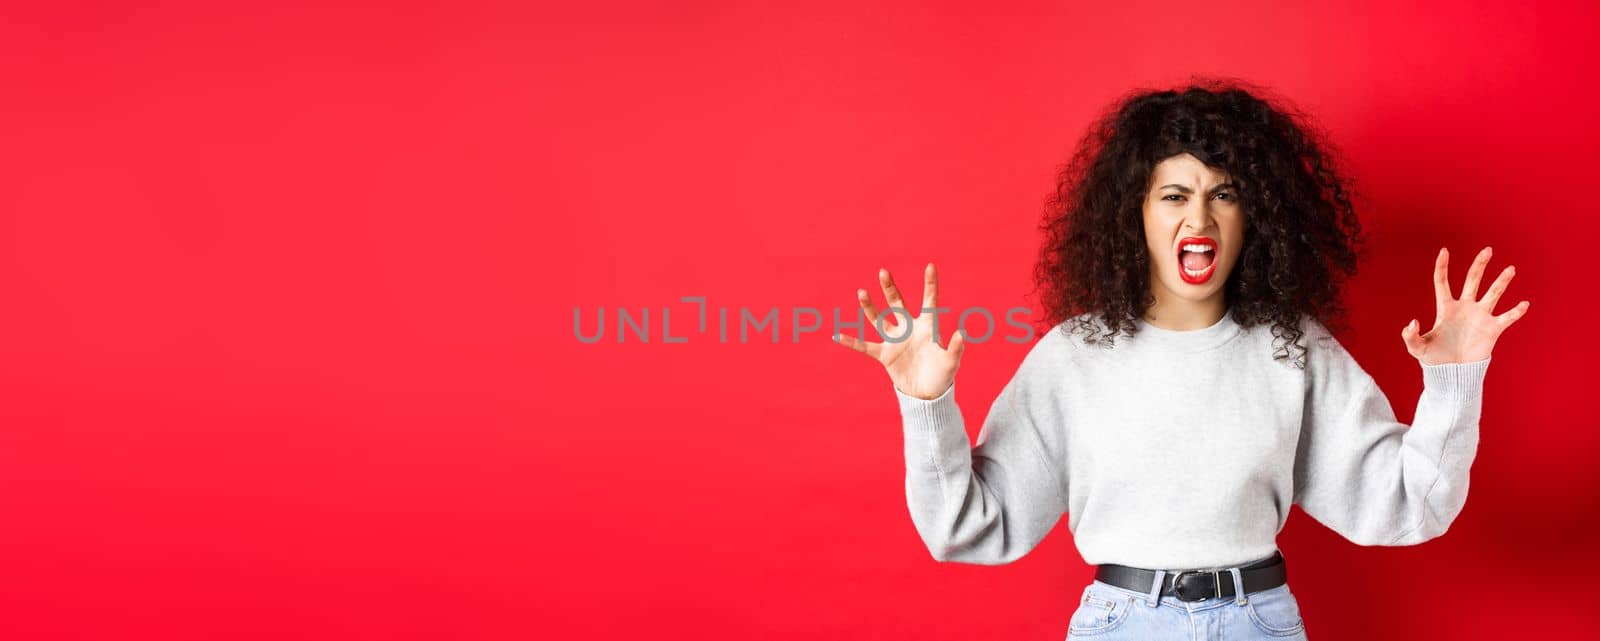 Scary woman trying to scare you, shouting and showing animal claws gesture, screaming at person, standing against red background.